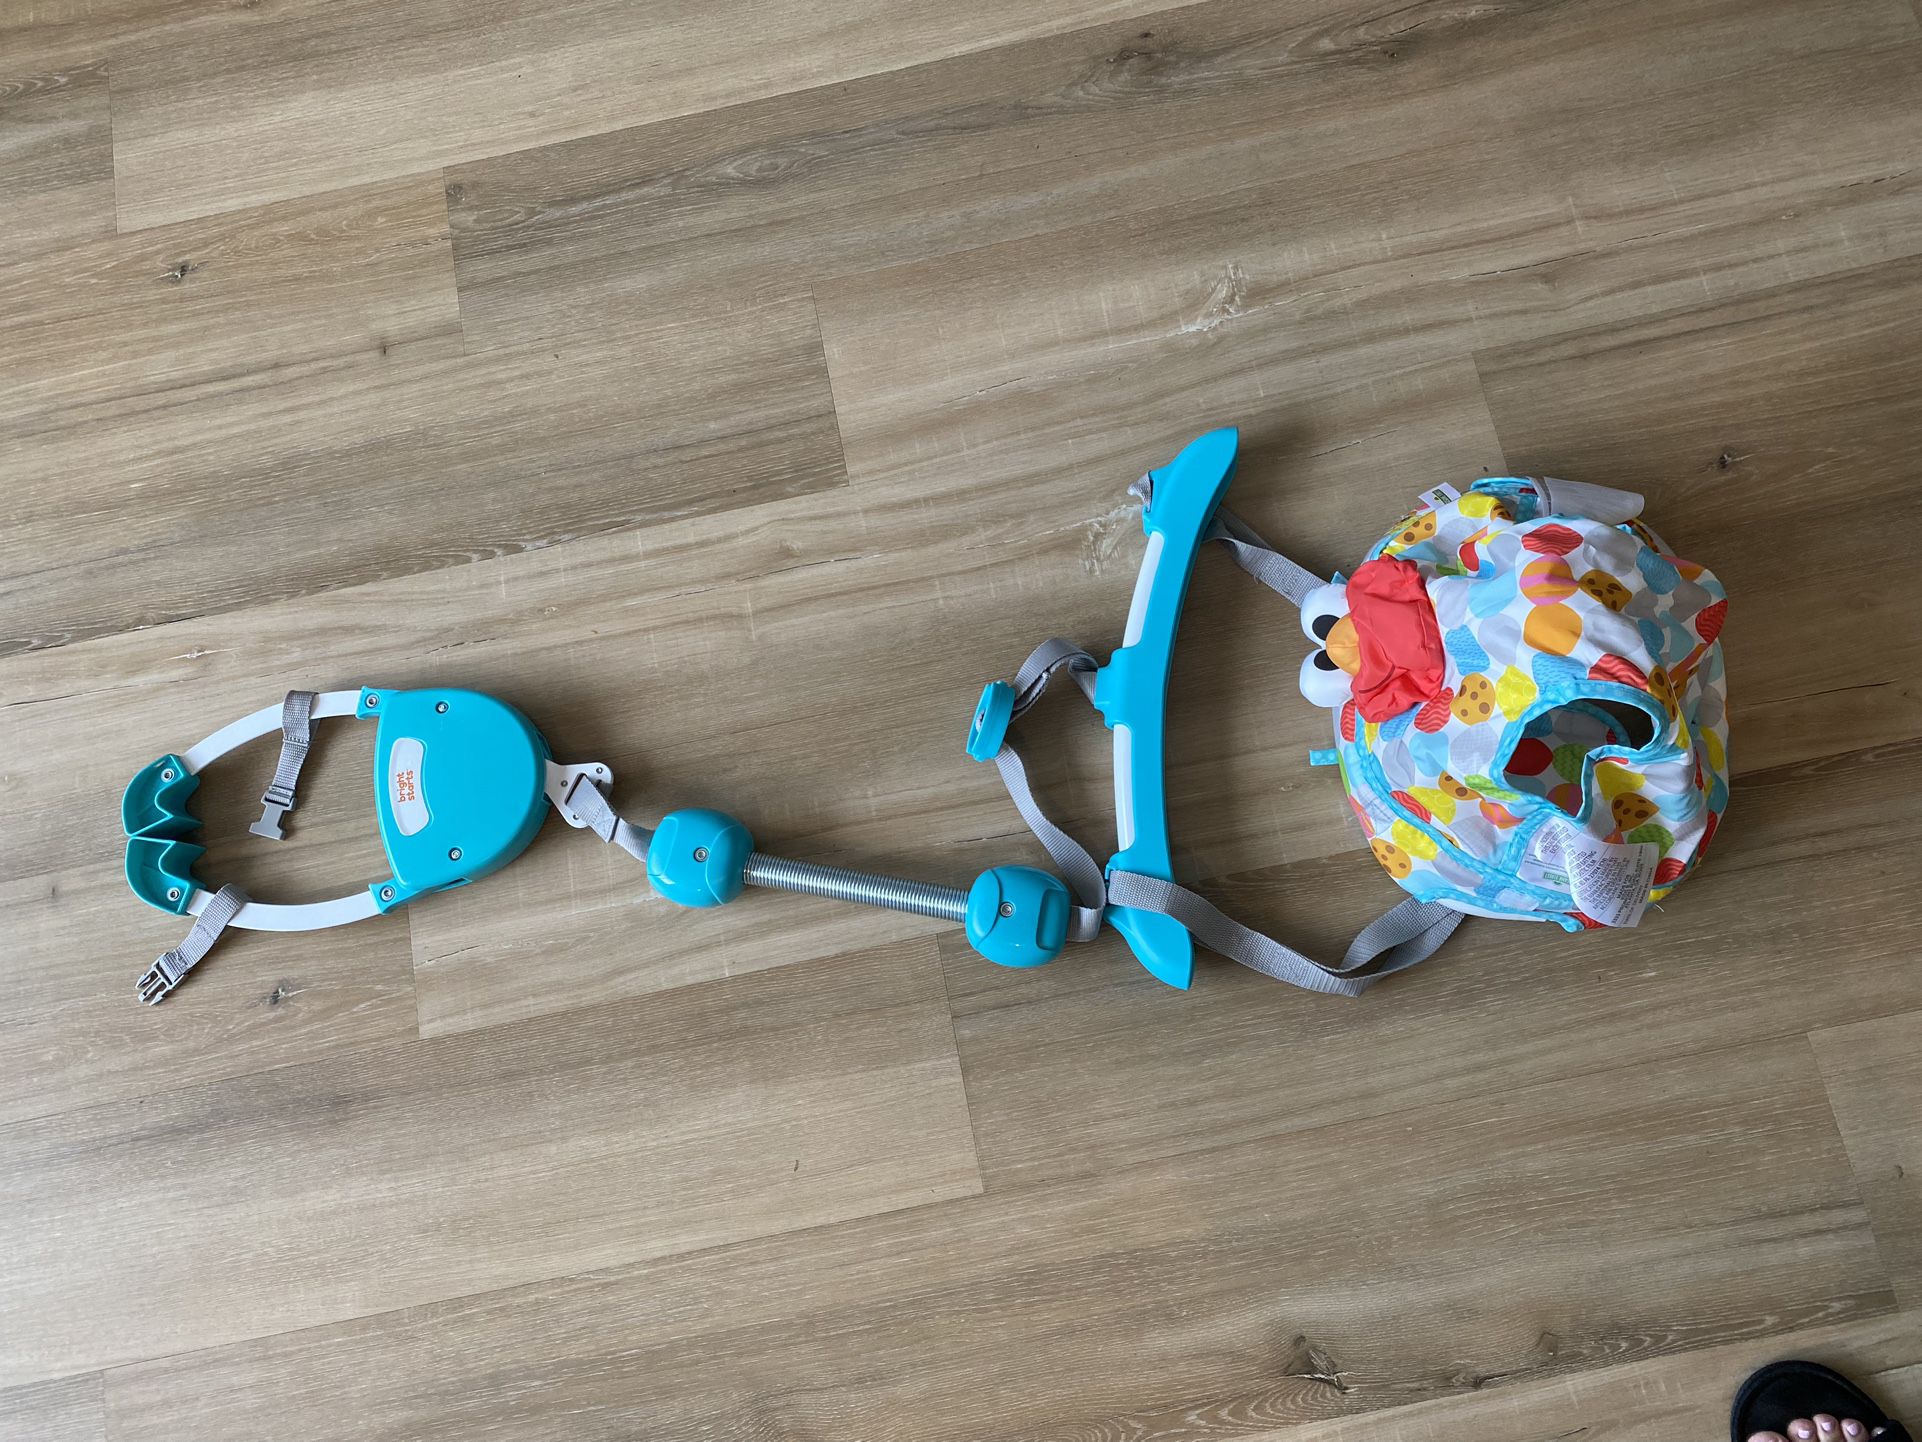 Bright Starts Baby Bouncer 